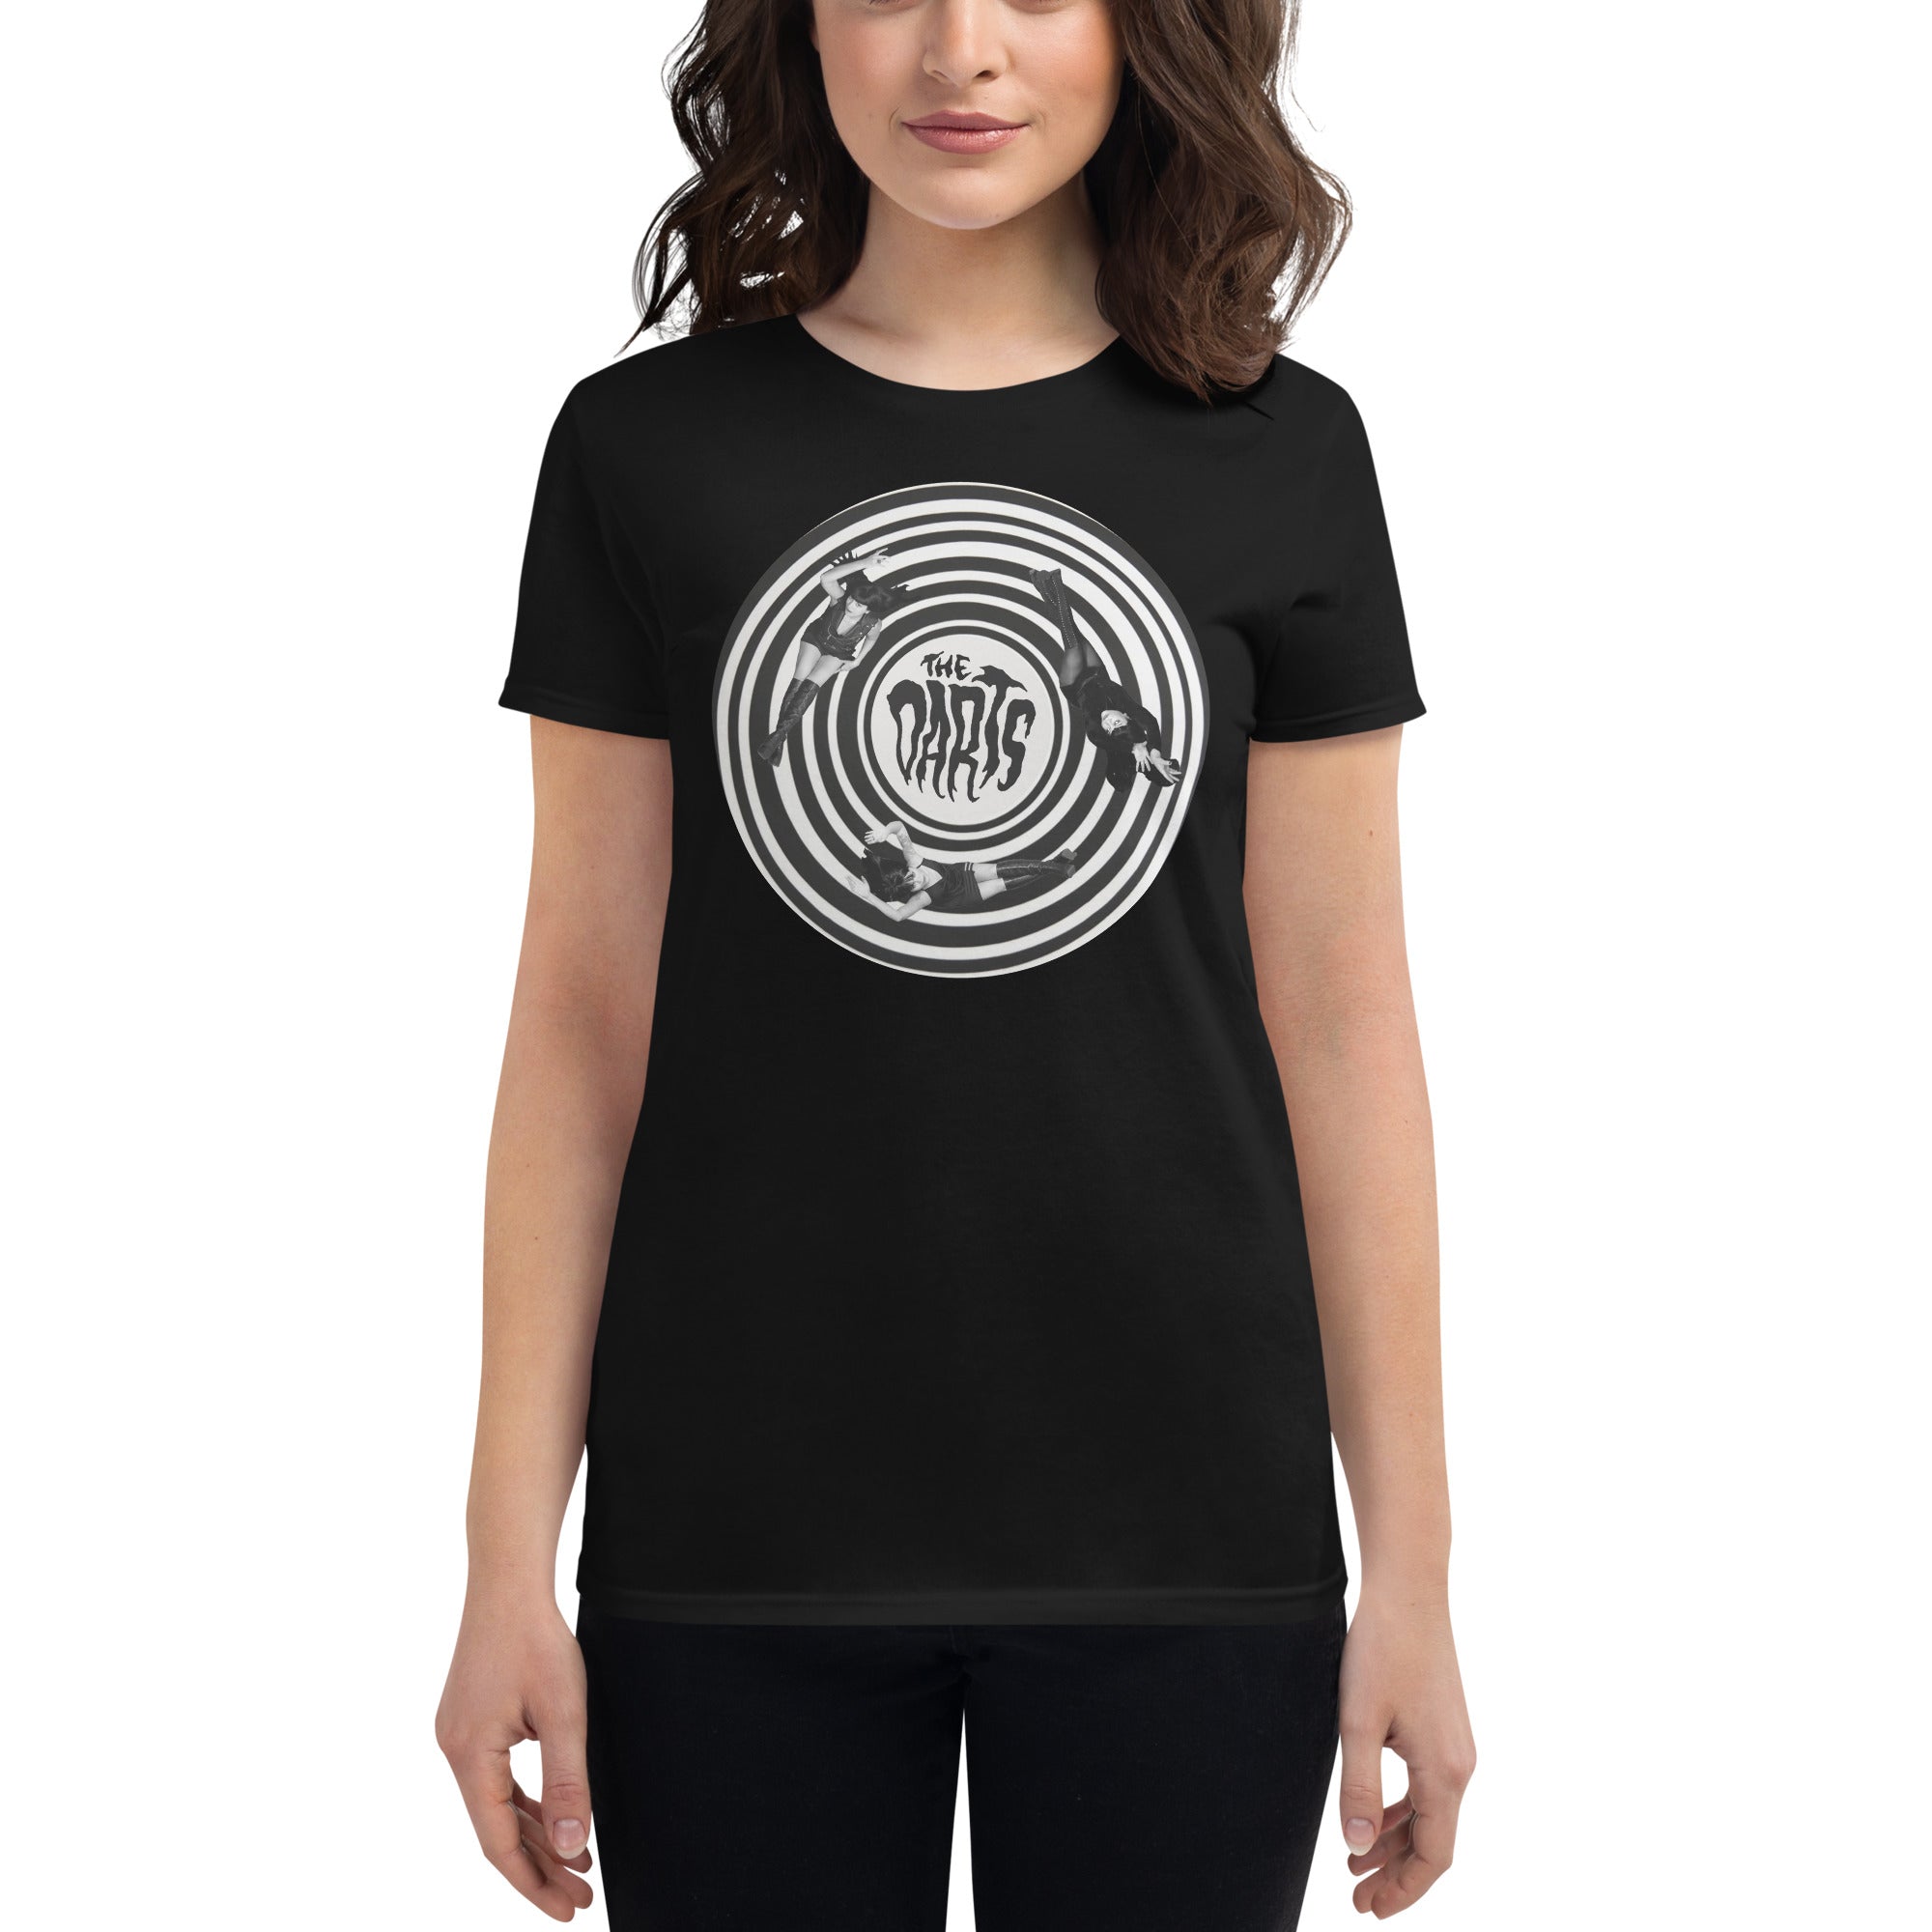 THE DARTS "Spiral" Fitted Black T-Shirt